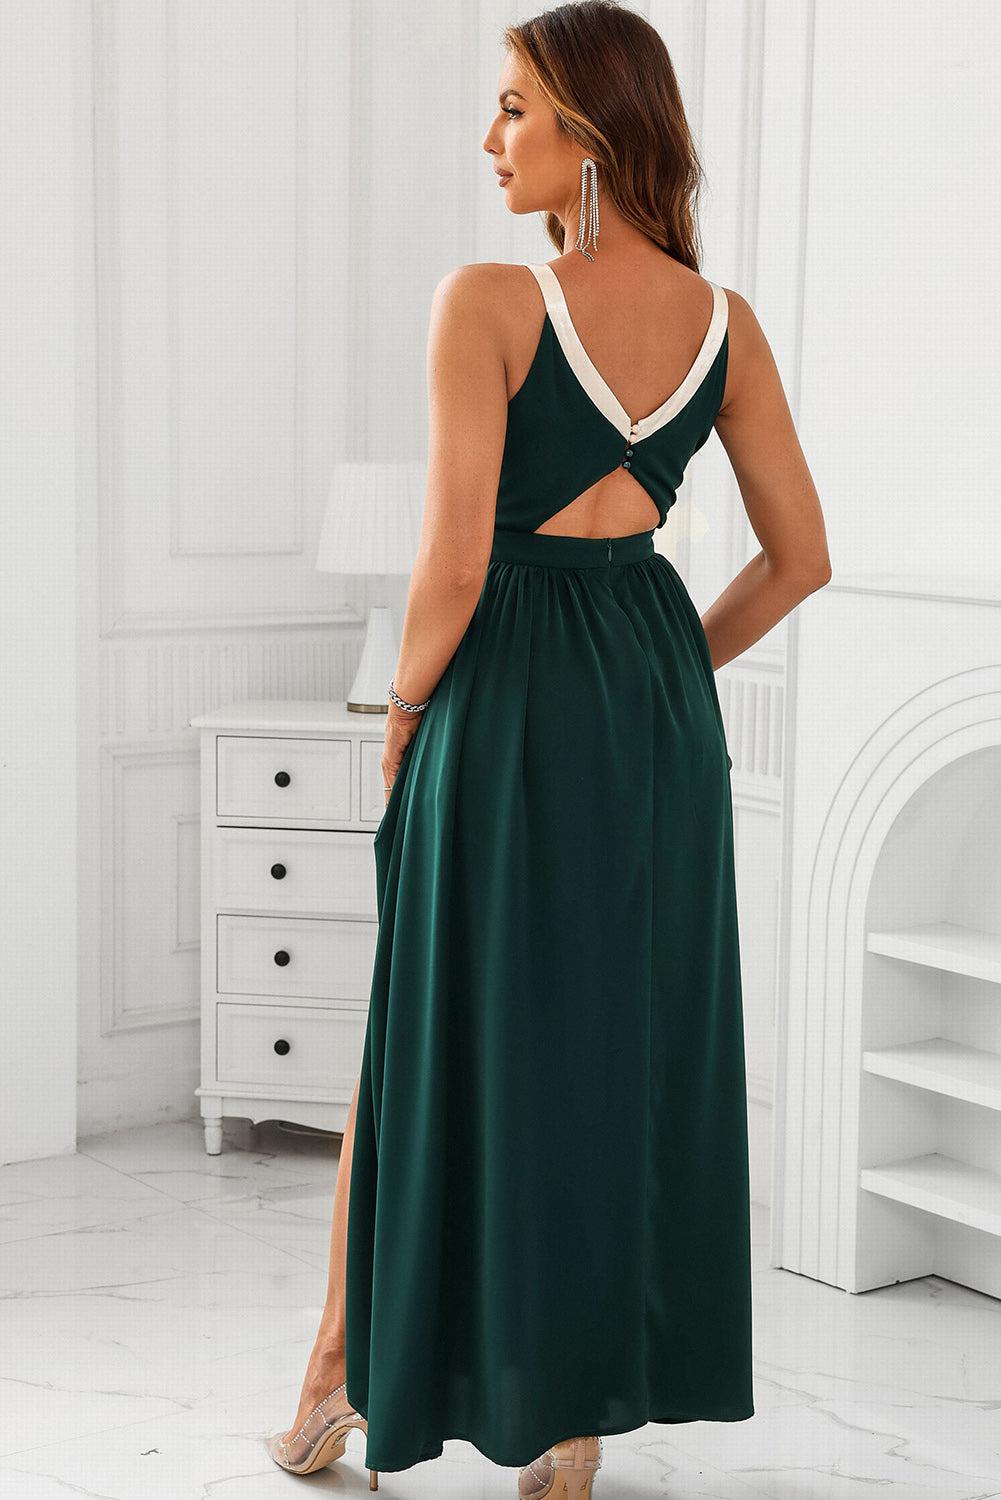 a woman wearing a green dress with a cut out back